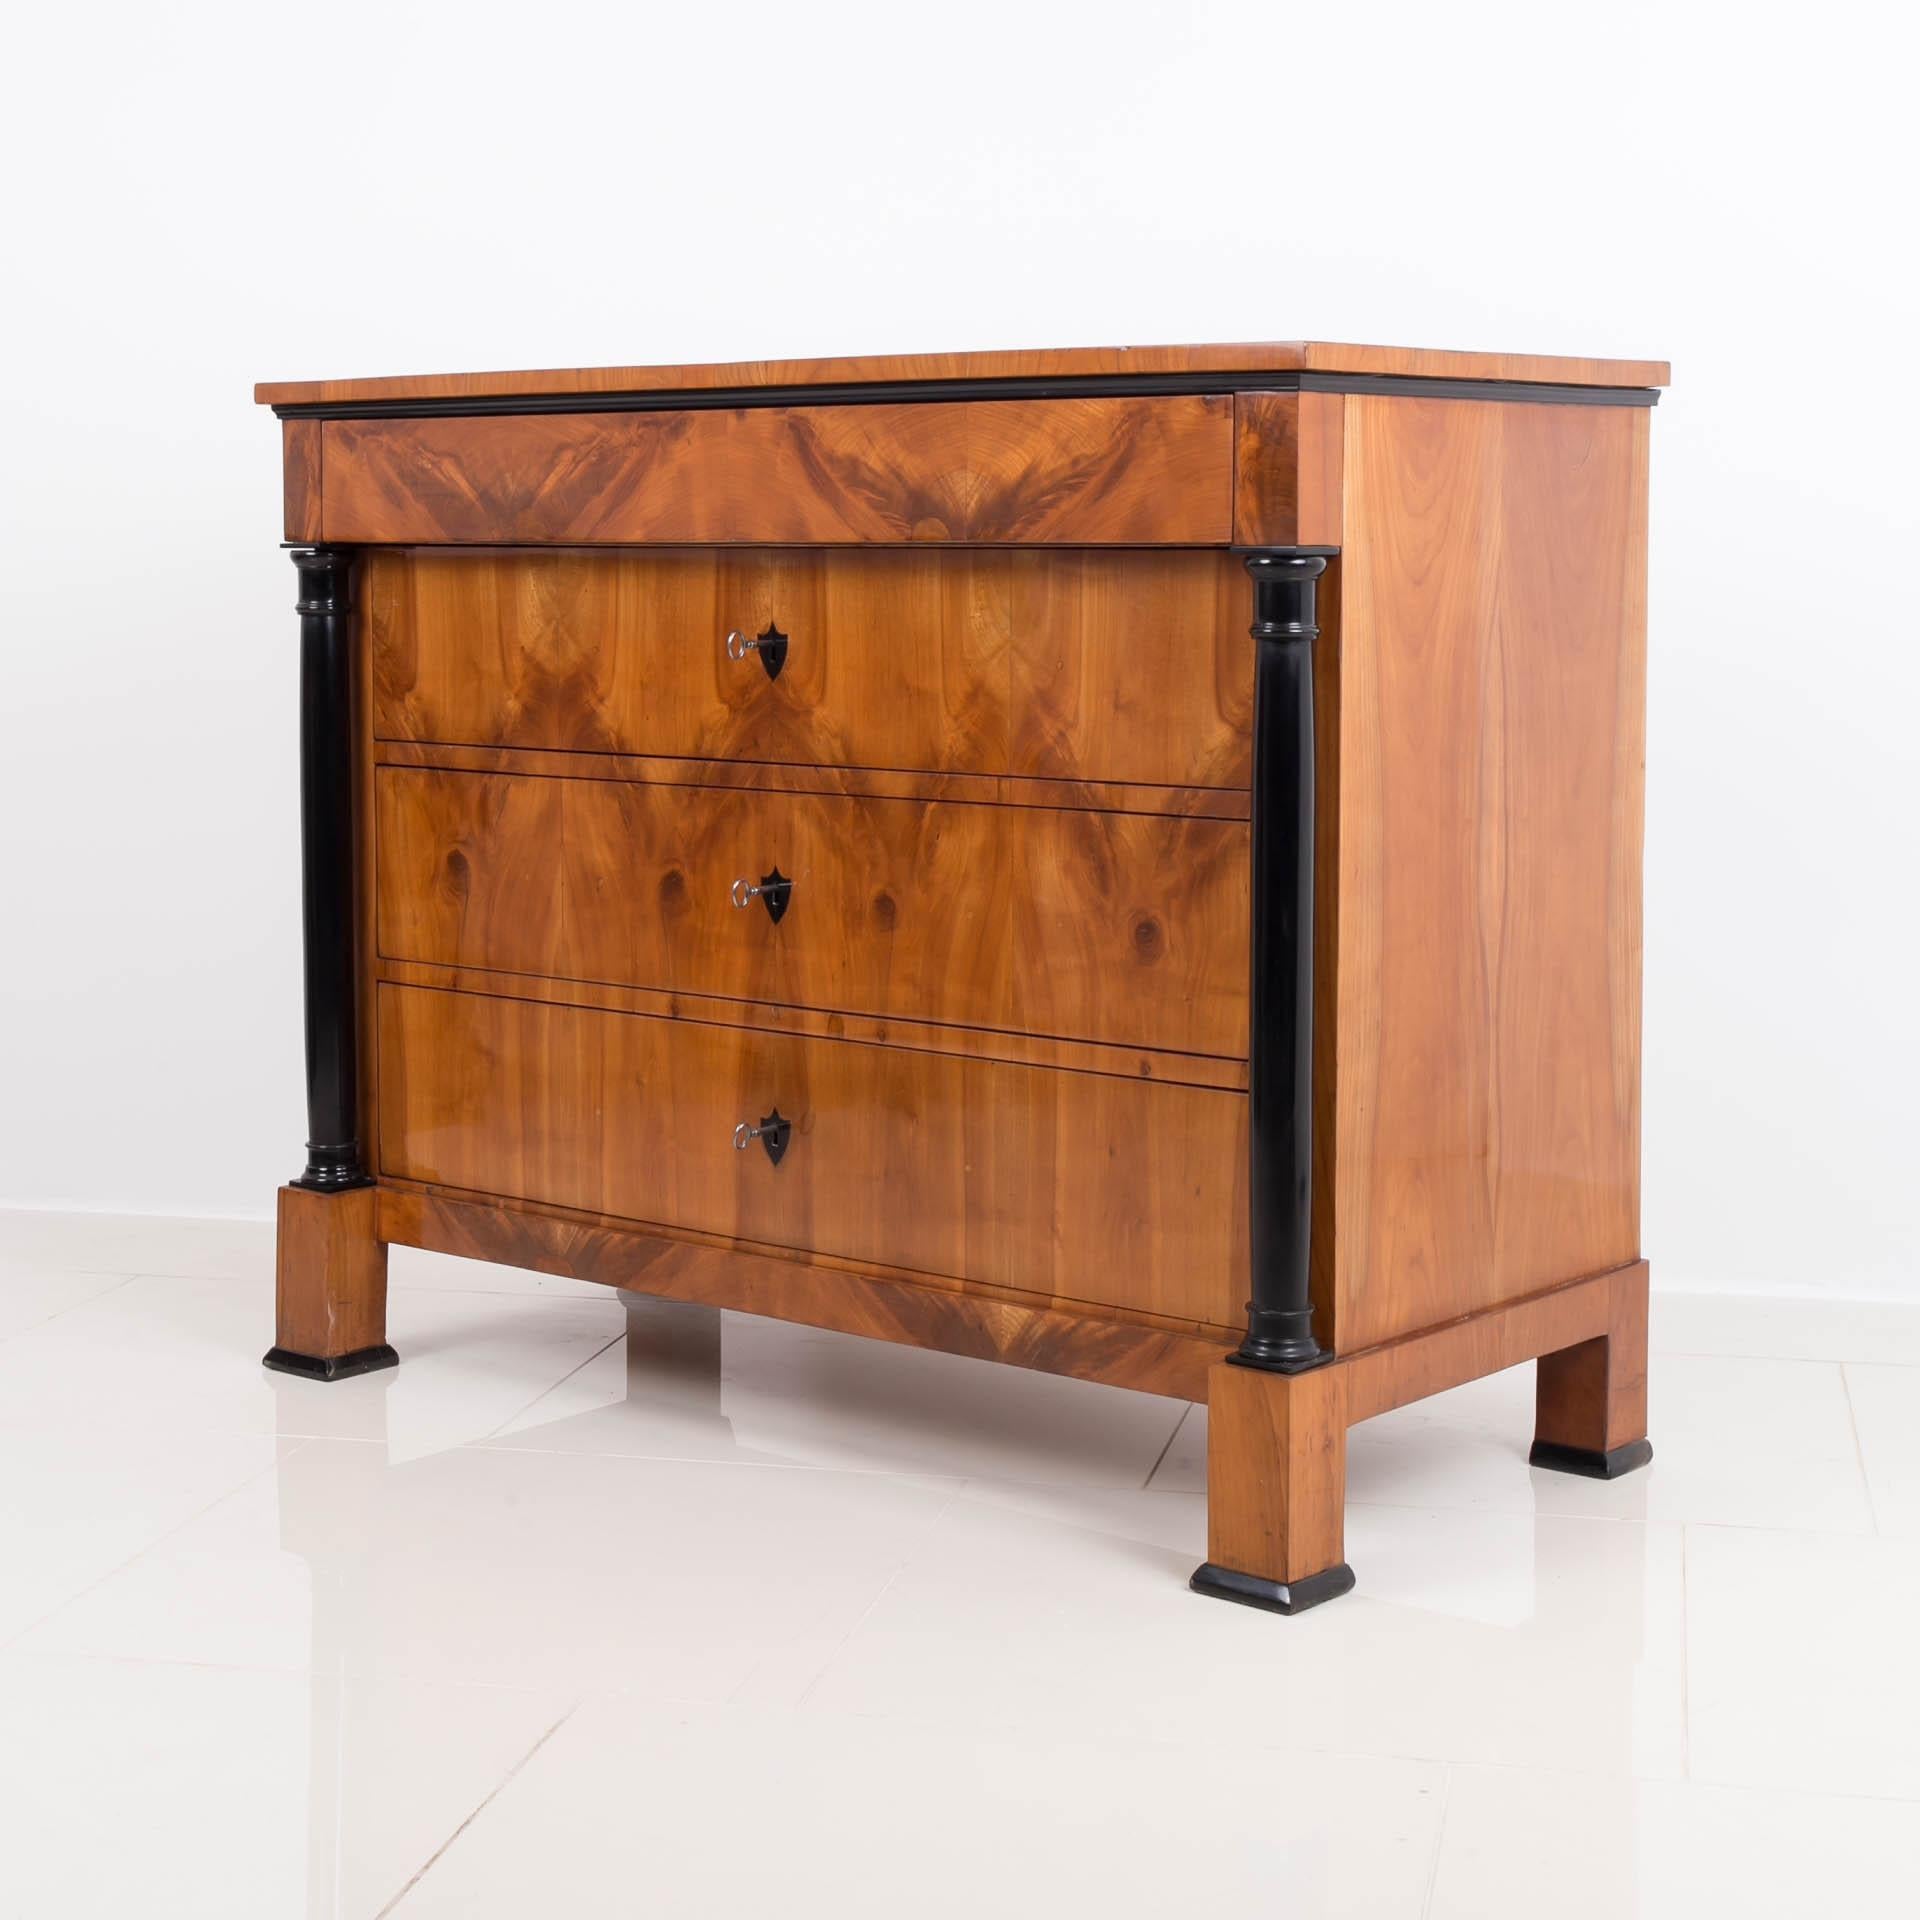 Biedermeier chest of drawers from first half of 19th century. This piece of furniture comes from Germany. It is made of coniferous wood and veneered with beautiful cherry wood veneer. It has undergone a careful renovation process in our workshop and